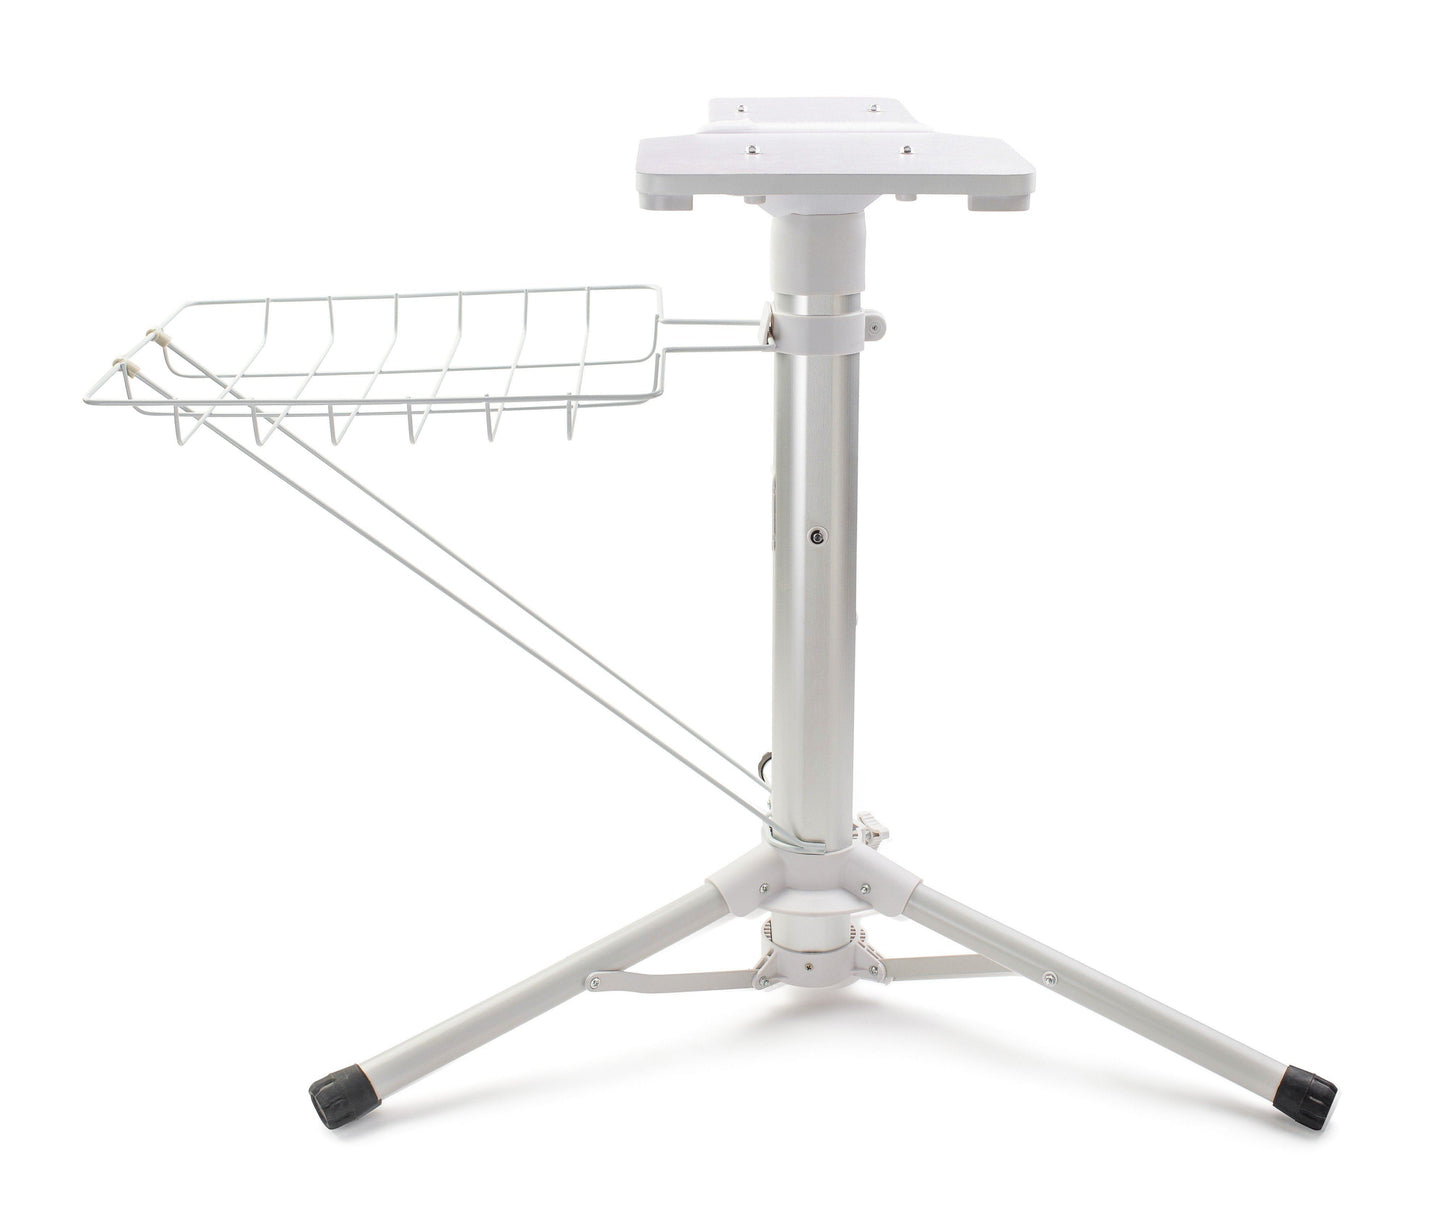 Mega 64cm Ironing Press - Steam and Dry Press (silver) - Singer Outlet Offer